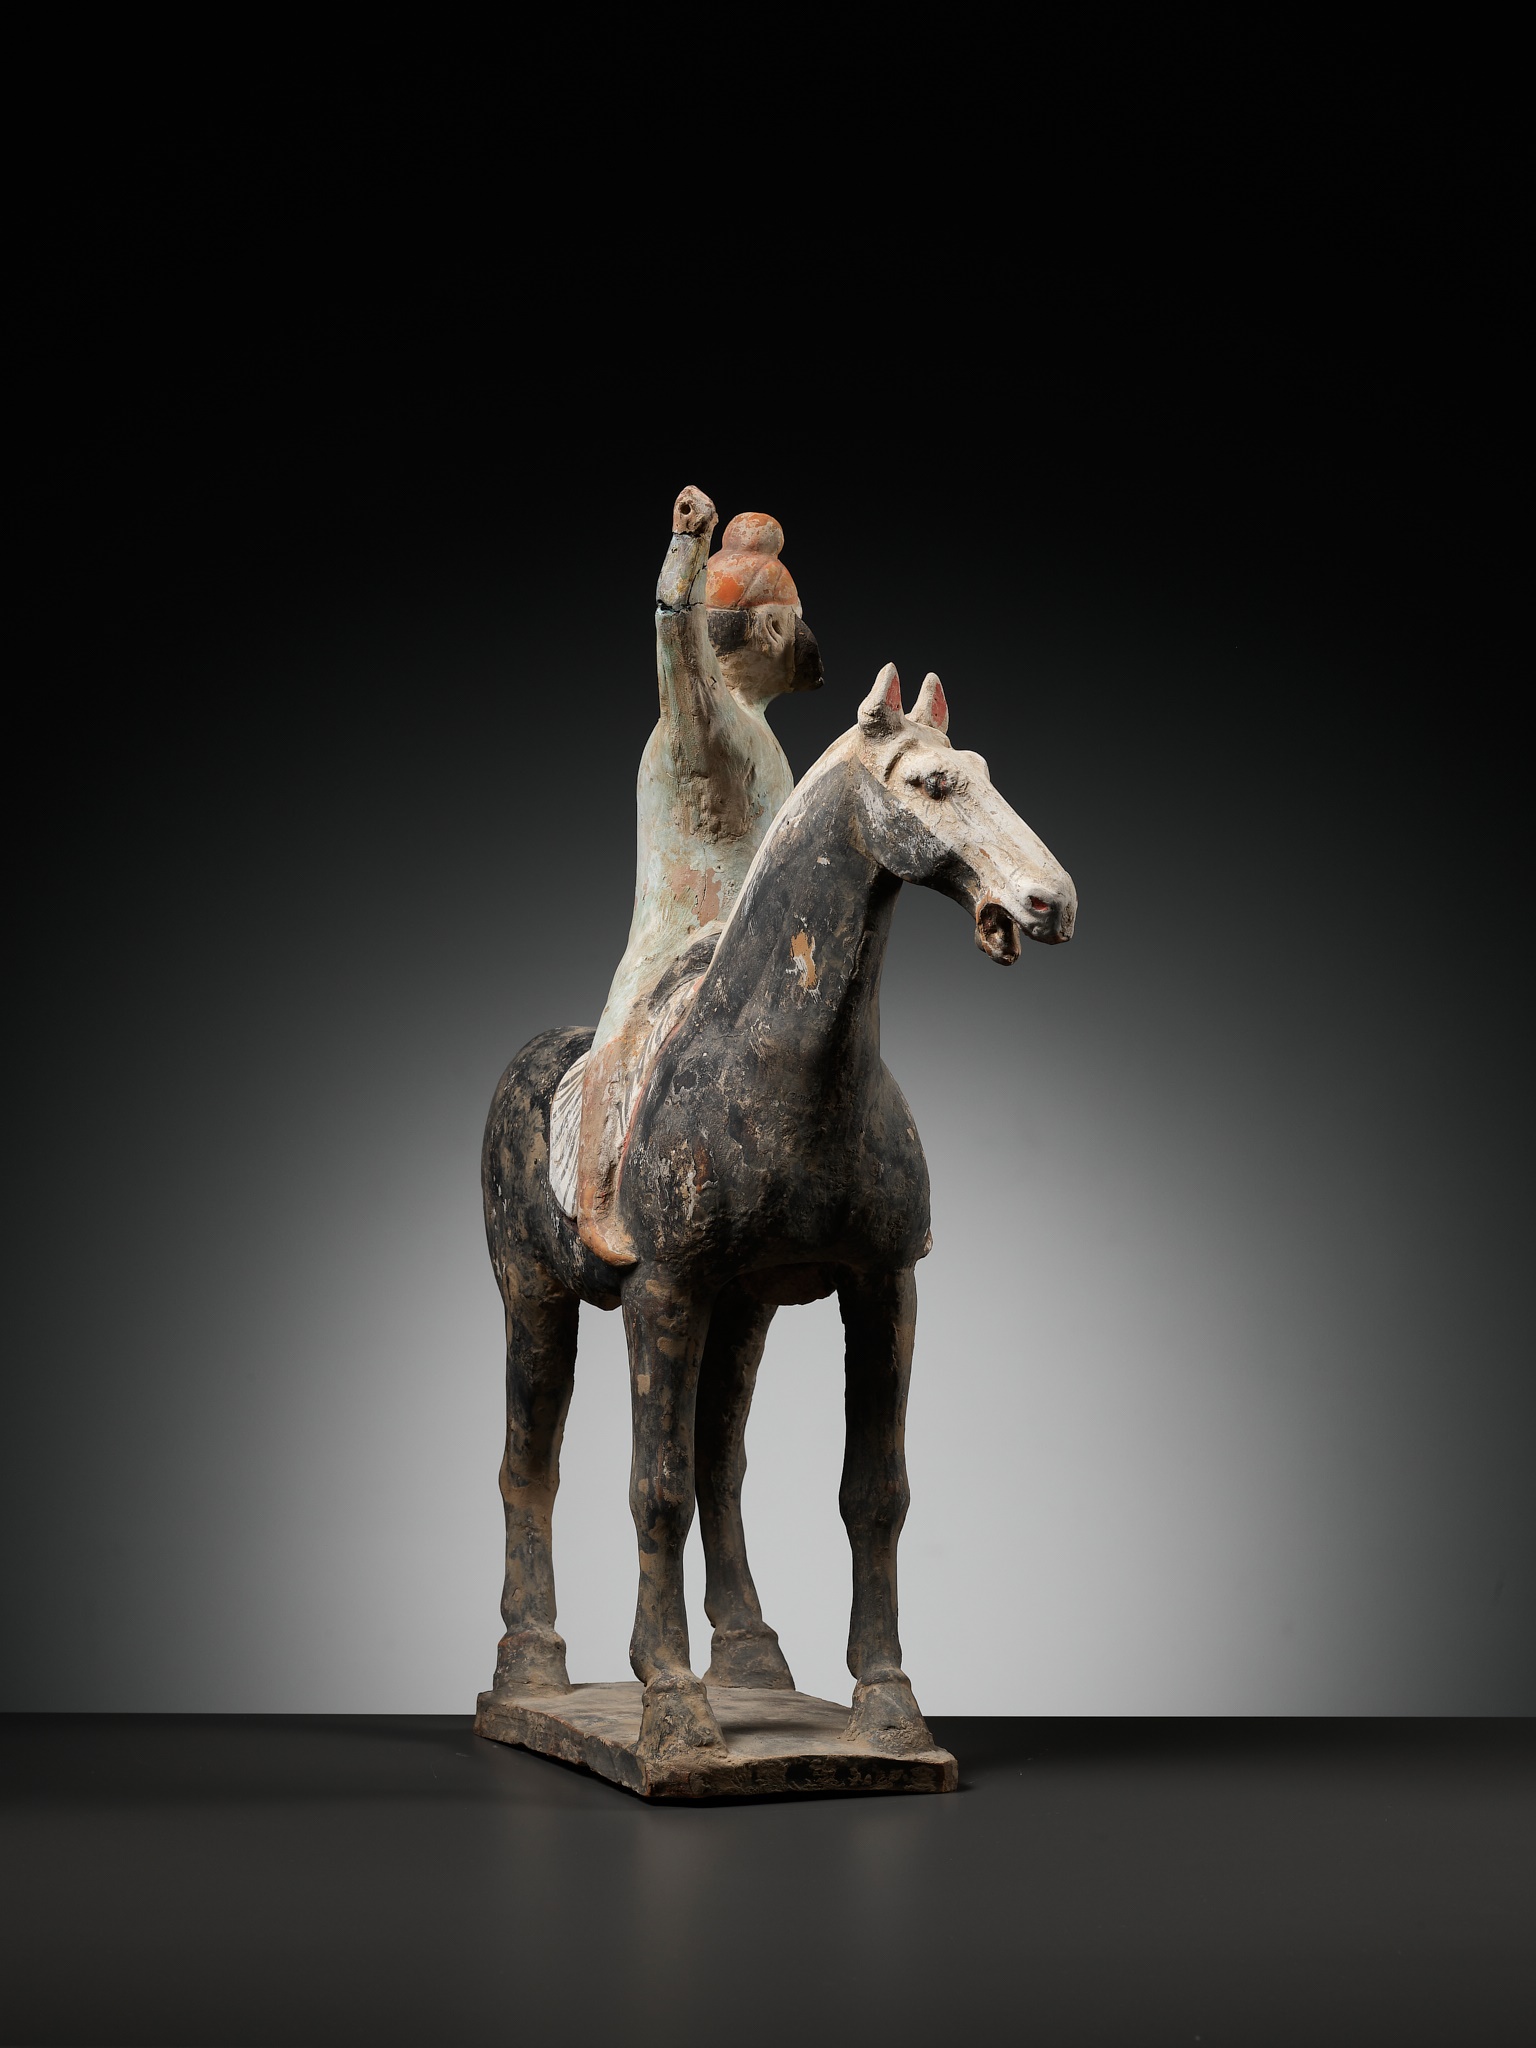 A RARE PAINTED POTTERY HORSE WITH A 'PHRYGIAN' RIDER AND TIGER CUB, TANG DYNASTY - Image 13 of 14